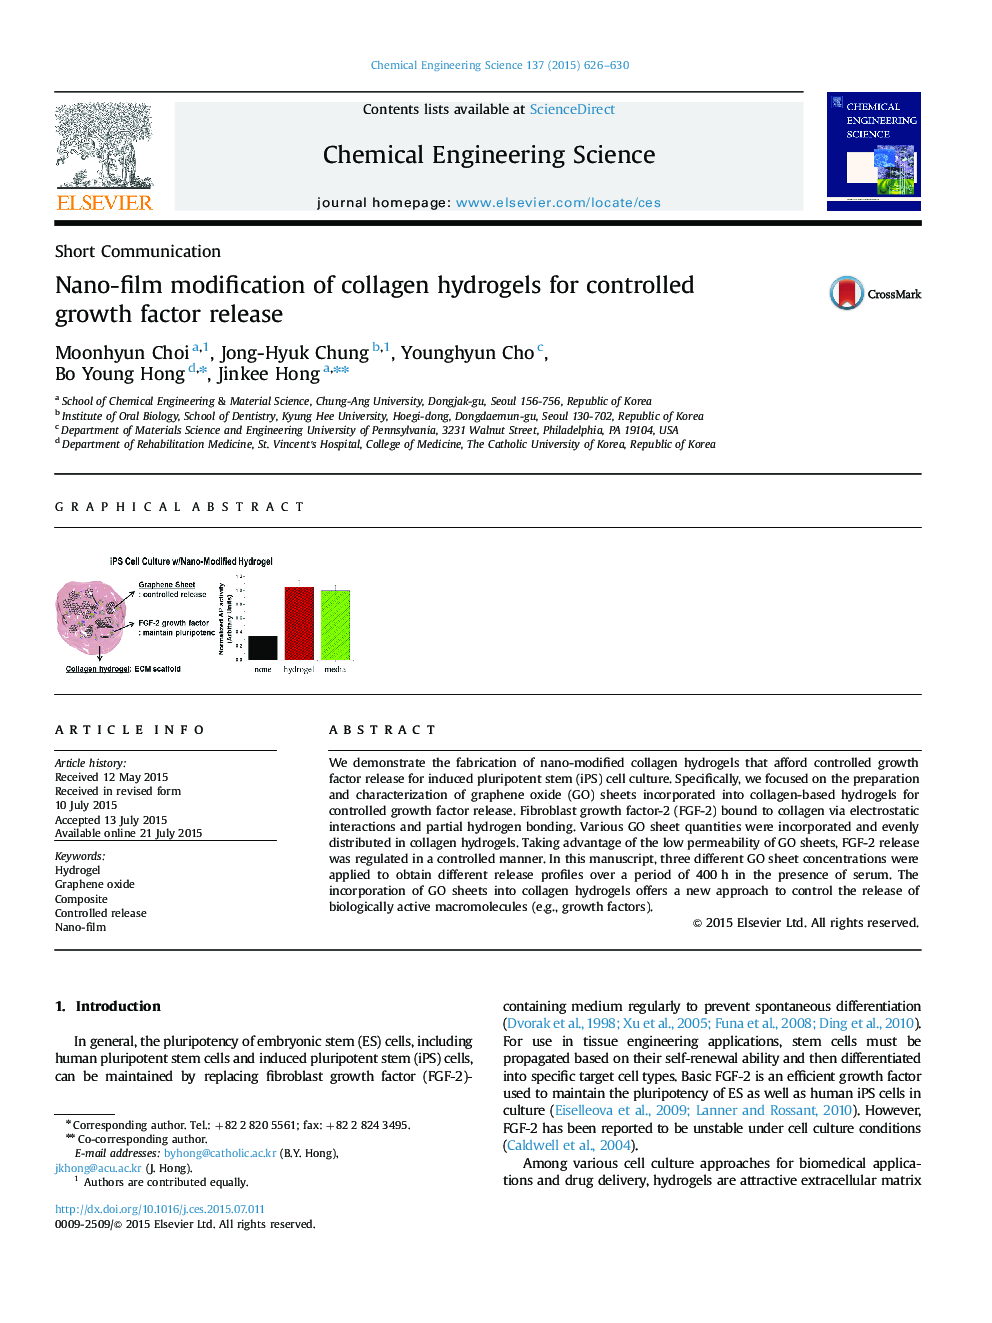 Nano-film modification of collagen hydrogels for controlled growth factor release